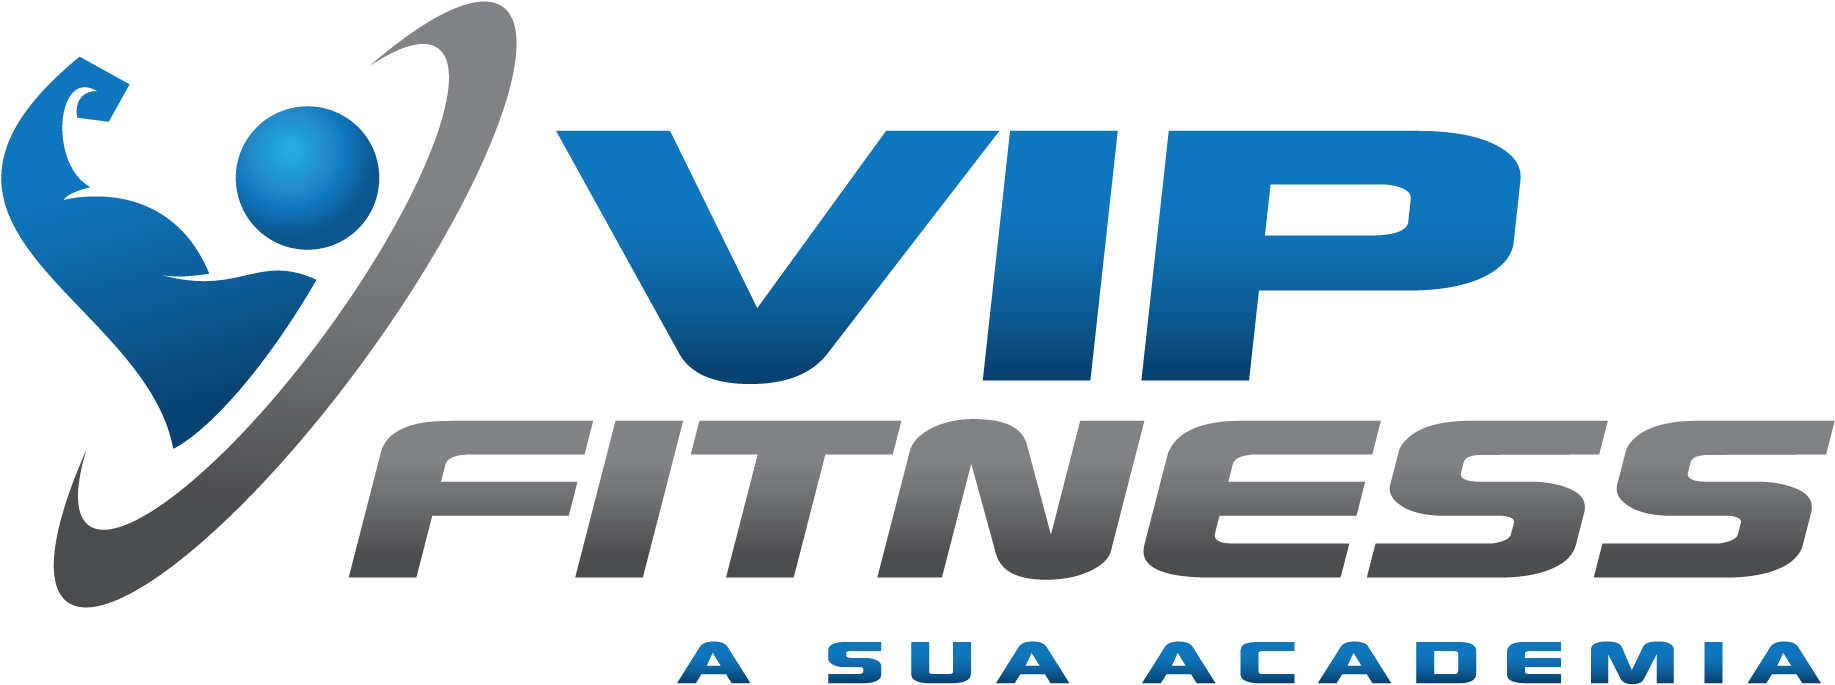 Download 24 Hour Fitness Logo Png PNG Image with No Background.